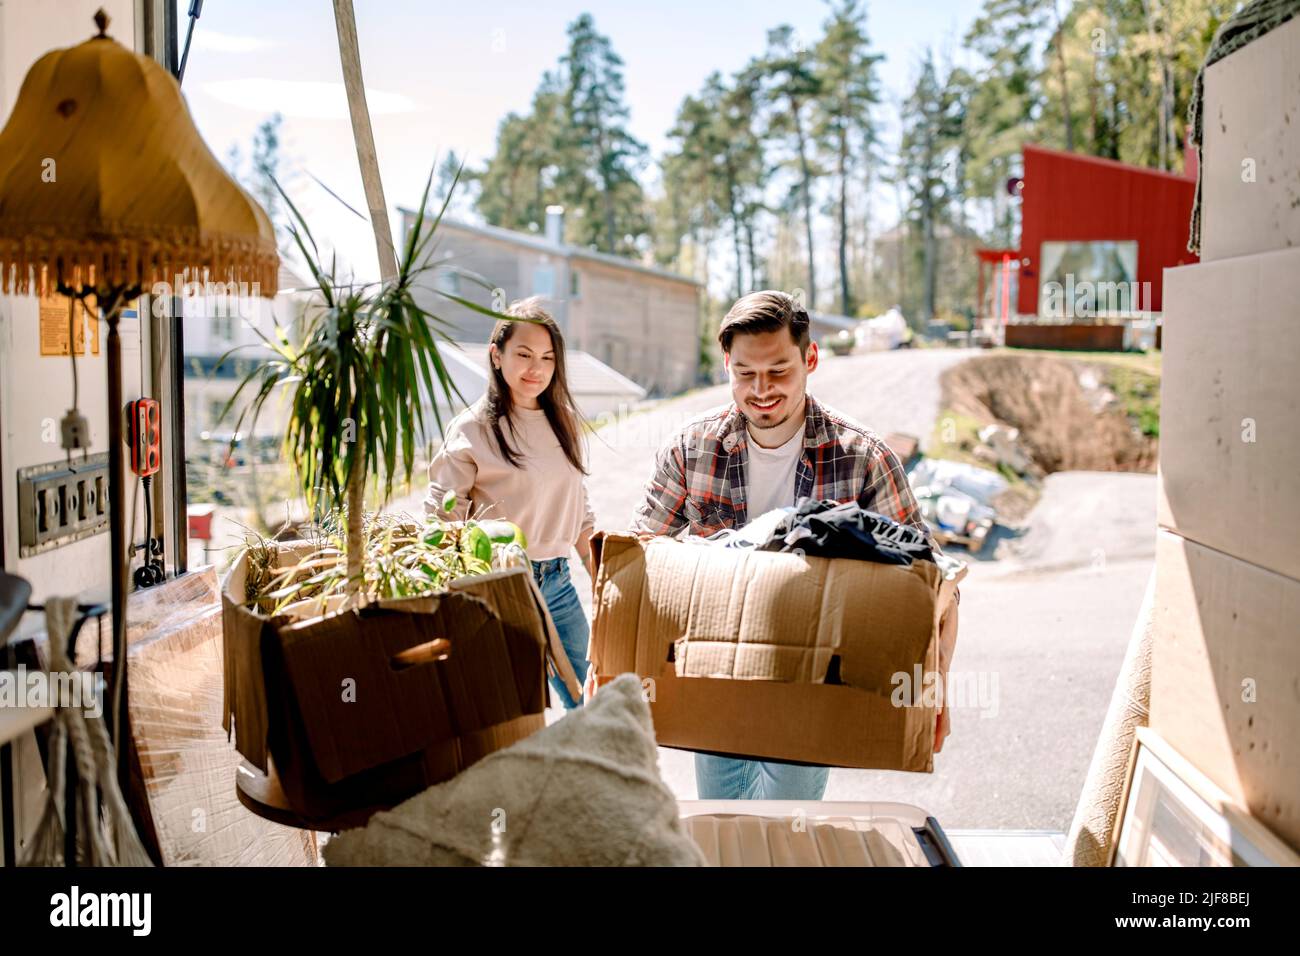 Couple picking cardboard boxes from delivery truck on sunny day Stock Photo